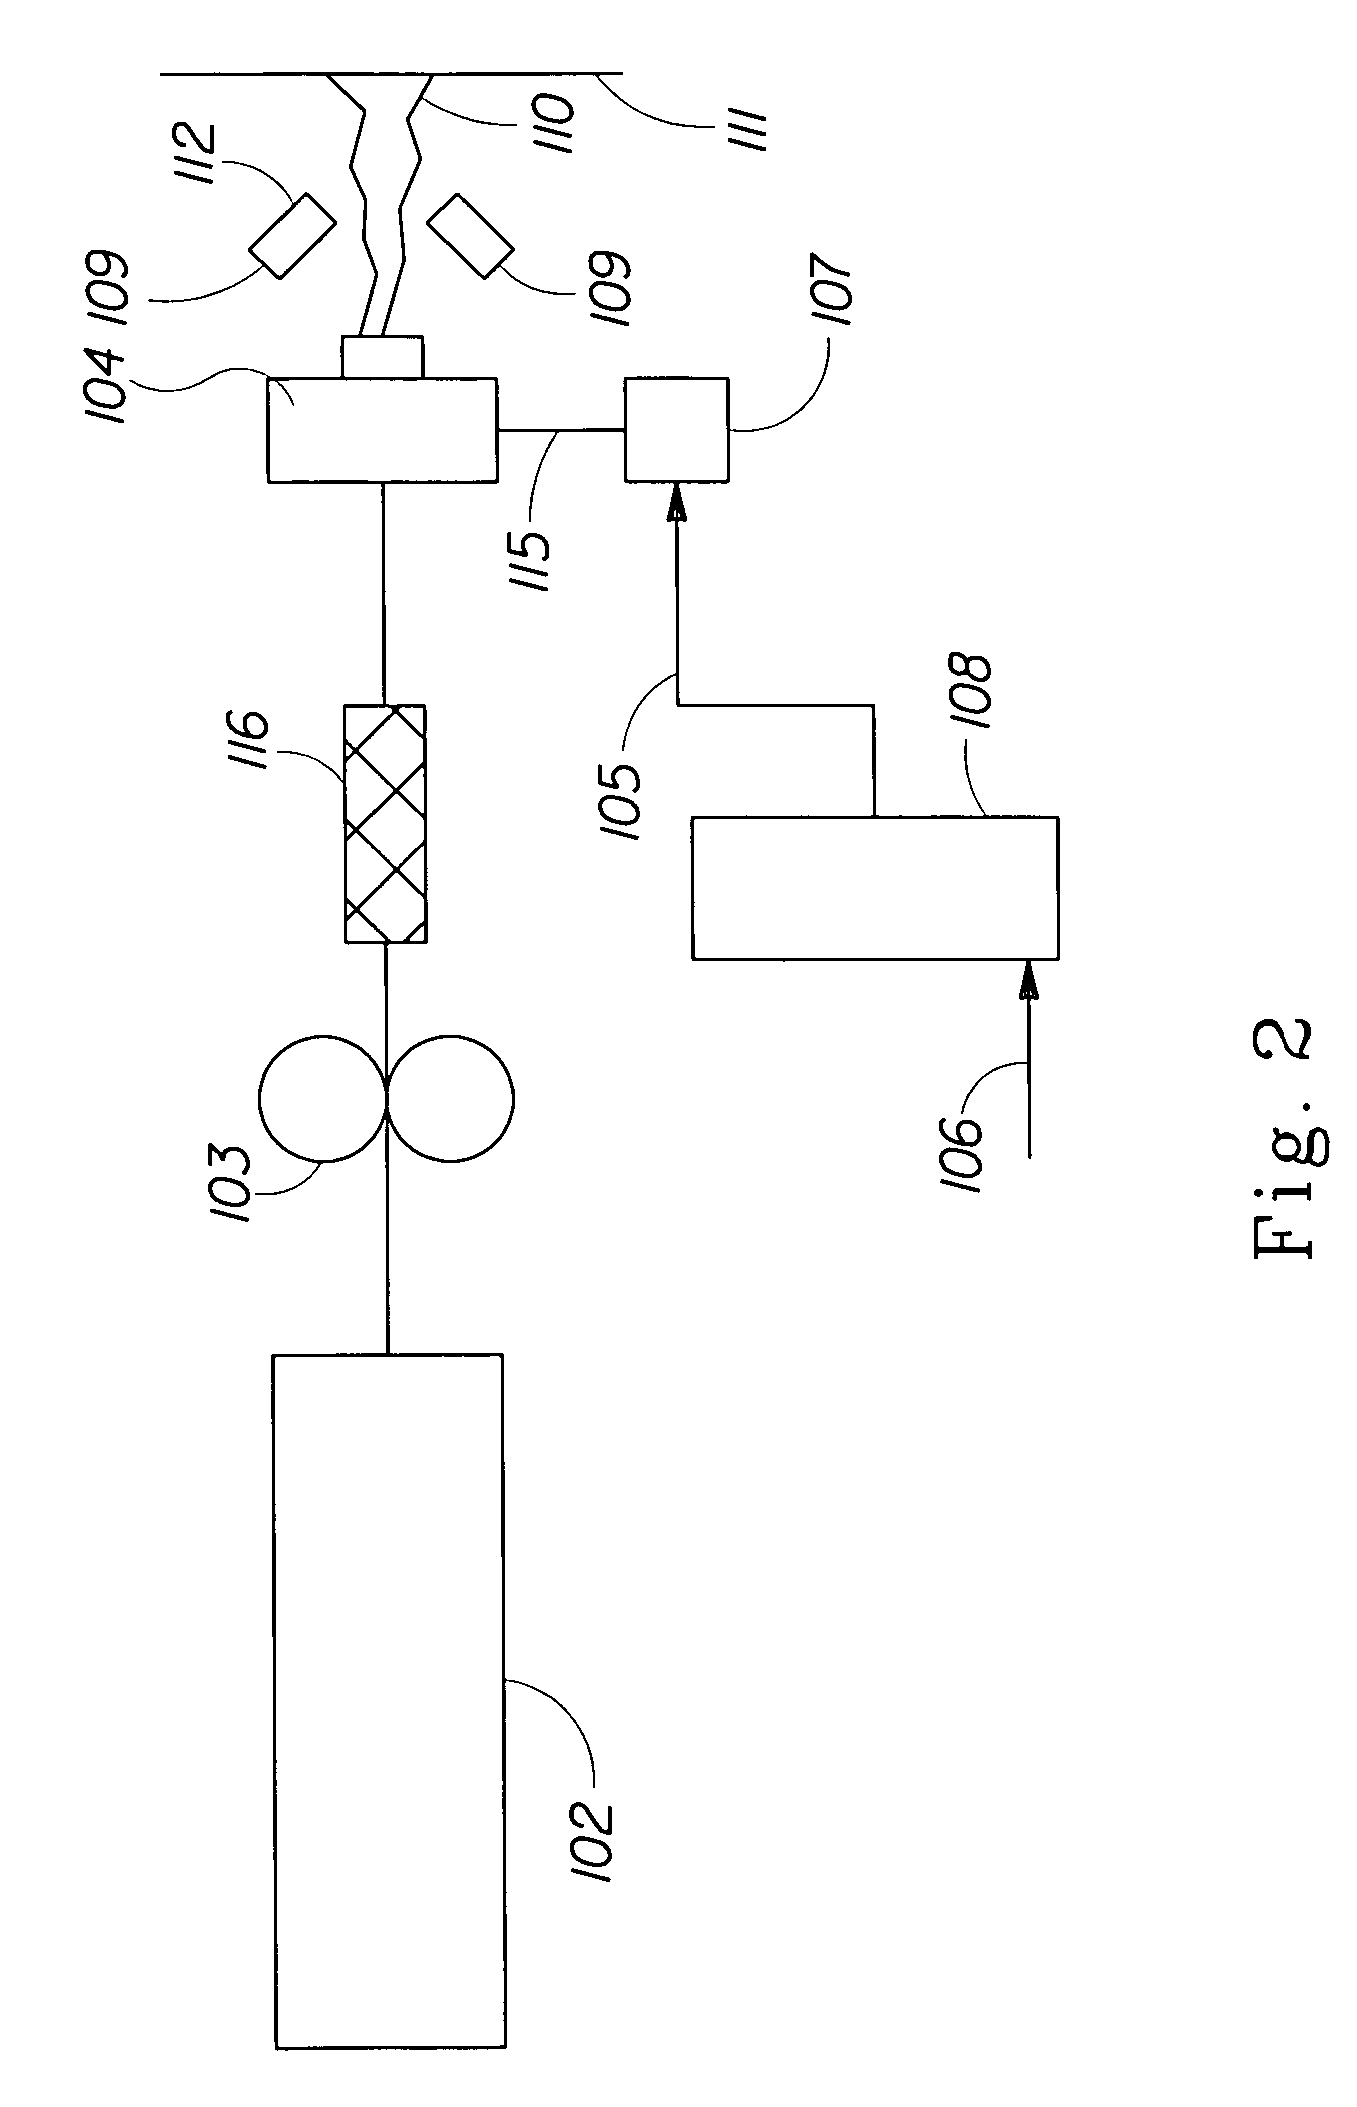 Polysaccharide structures comprising an unsubstituted polysaccharide and processes for making same